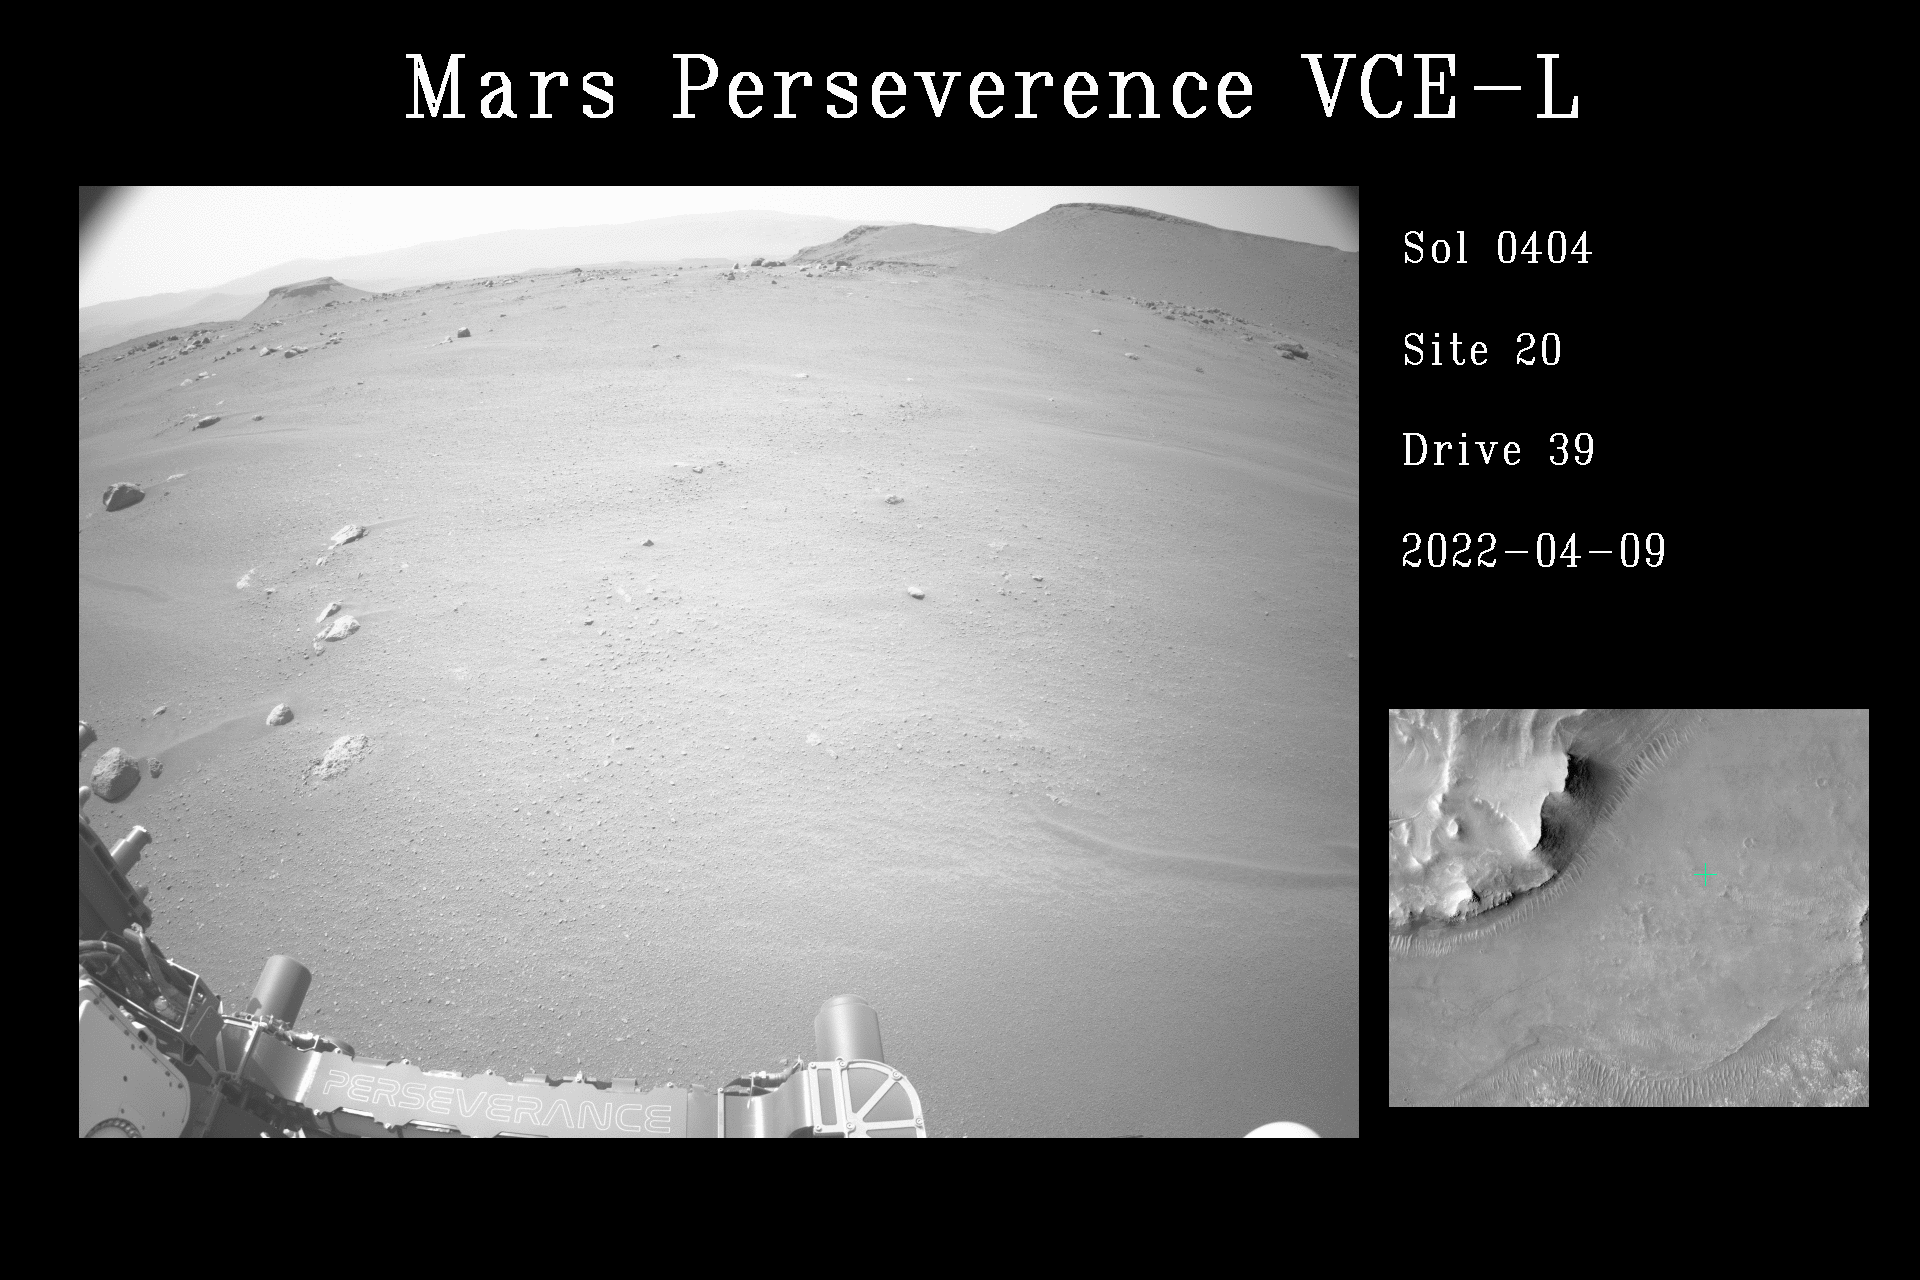 a video of the rover driving on Mars on its own